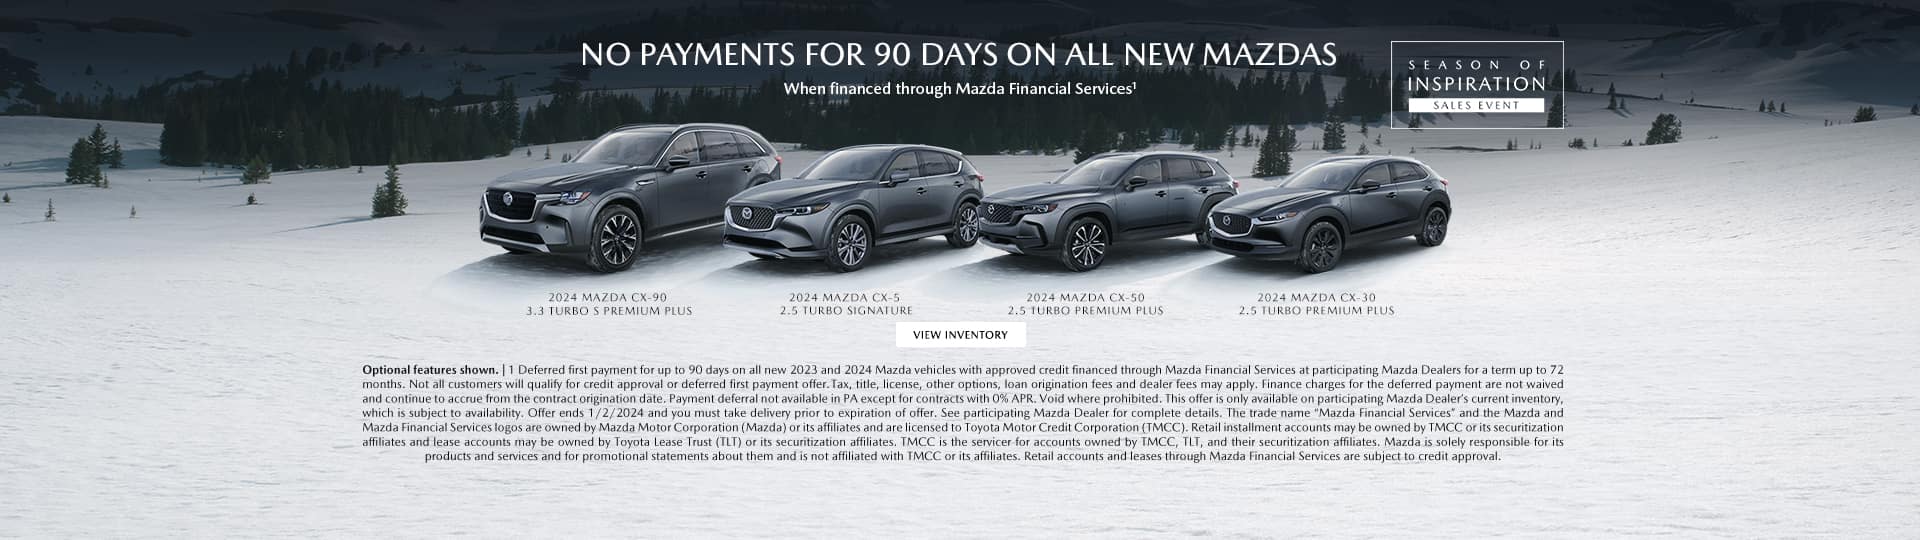 No payments for 90 days on All Mazdas